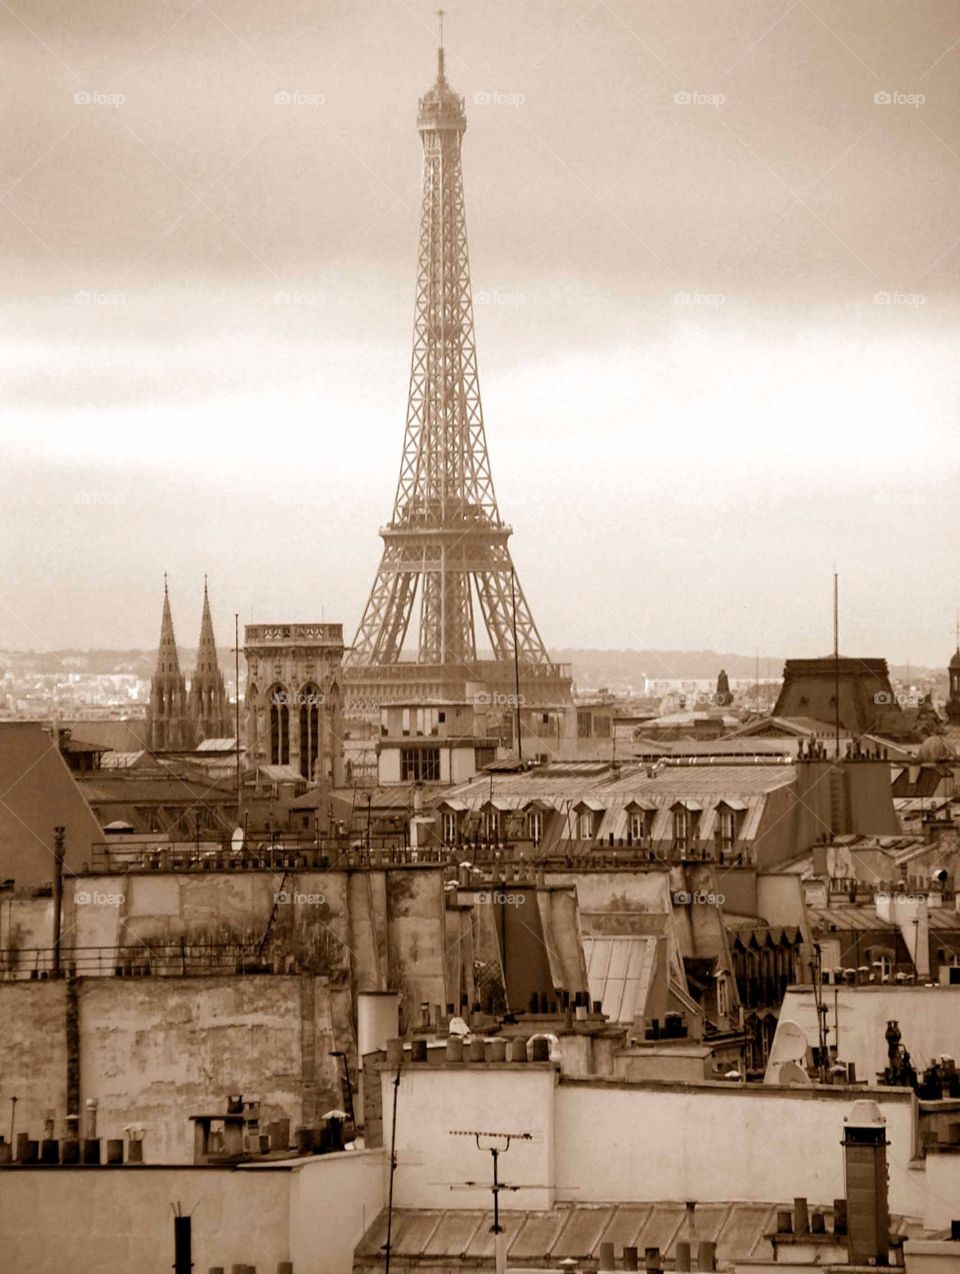 Paris rooftops. Paris rooftops and Eiffel Tower